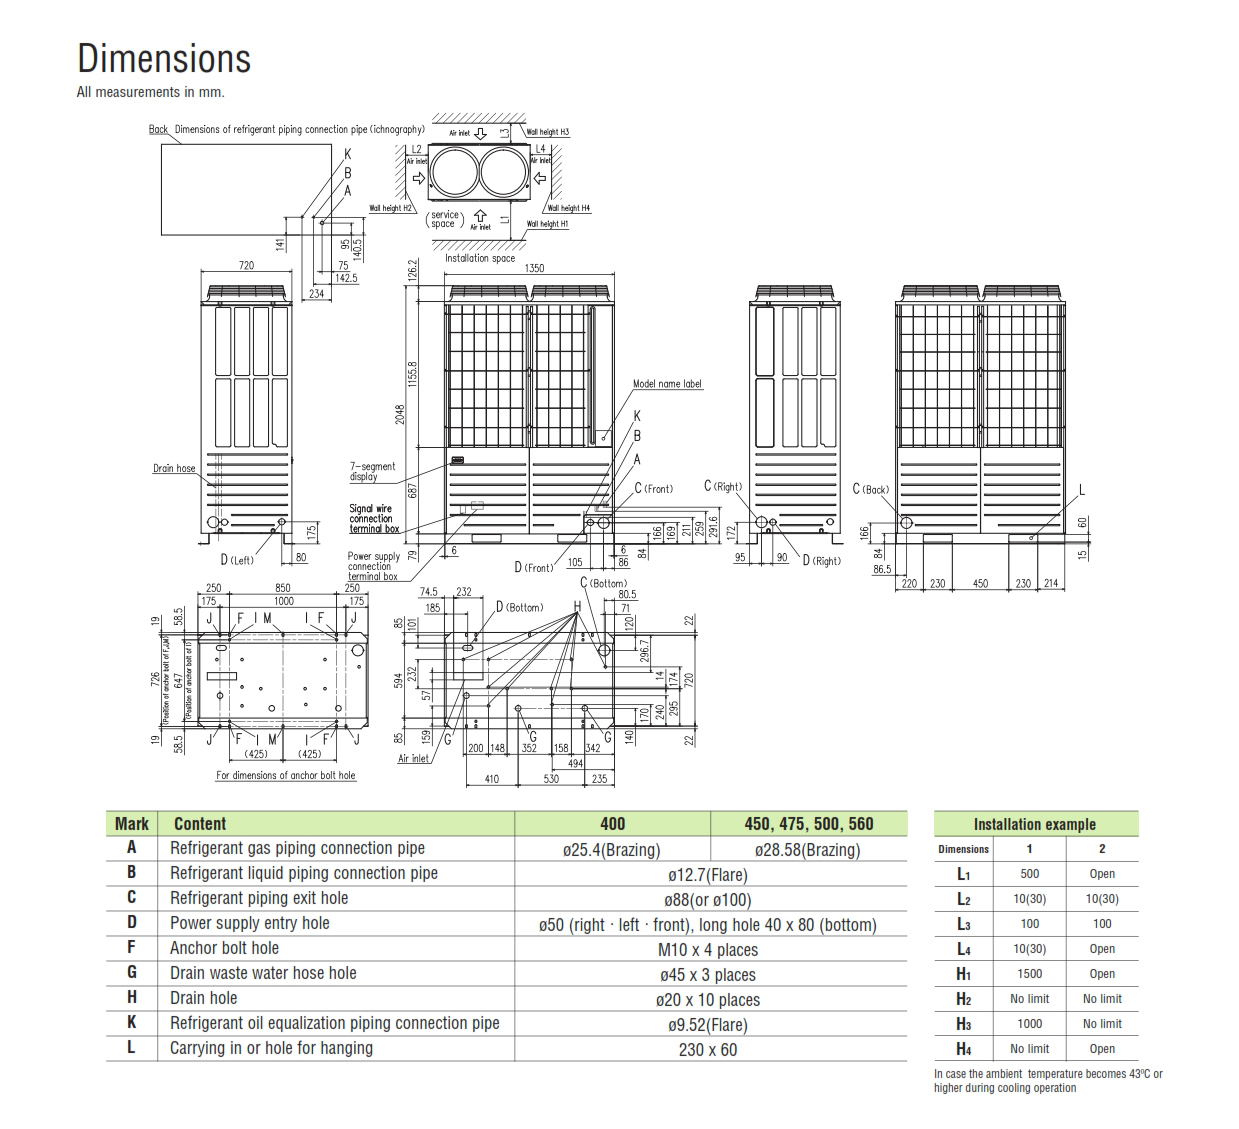 Heat pump combination systems 42, 44, 46, 48, 50, 52, 54, 56, 58, 60HP (120.0kW~168.0kW)